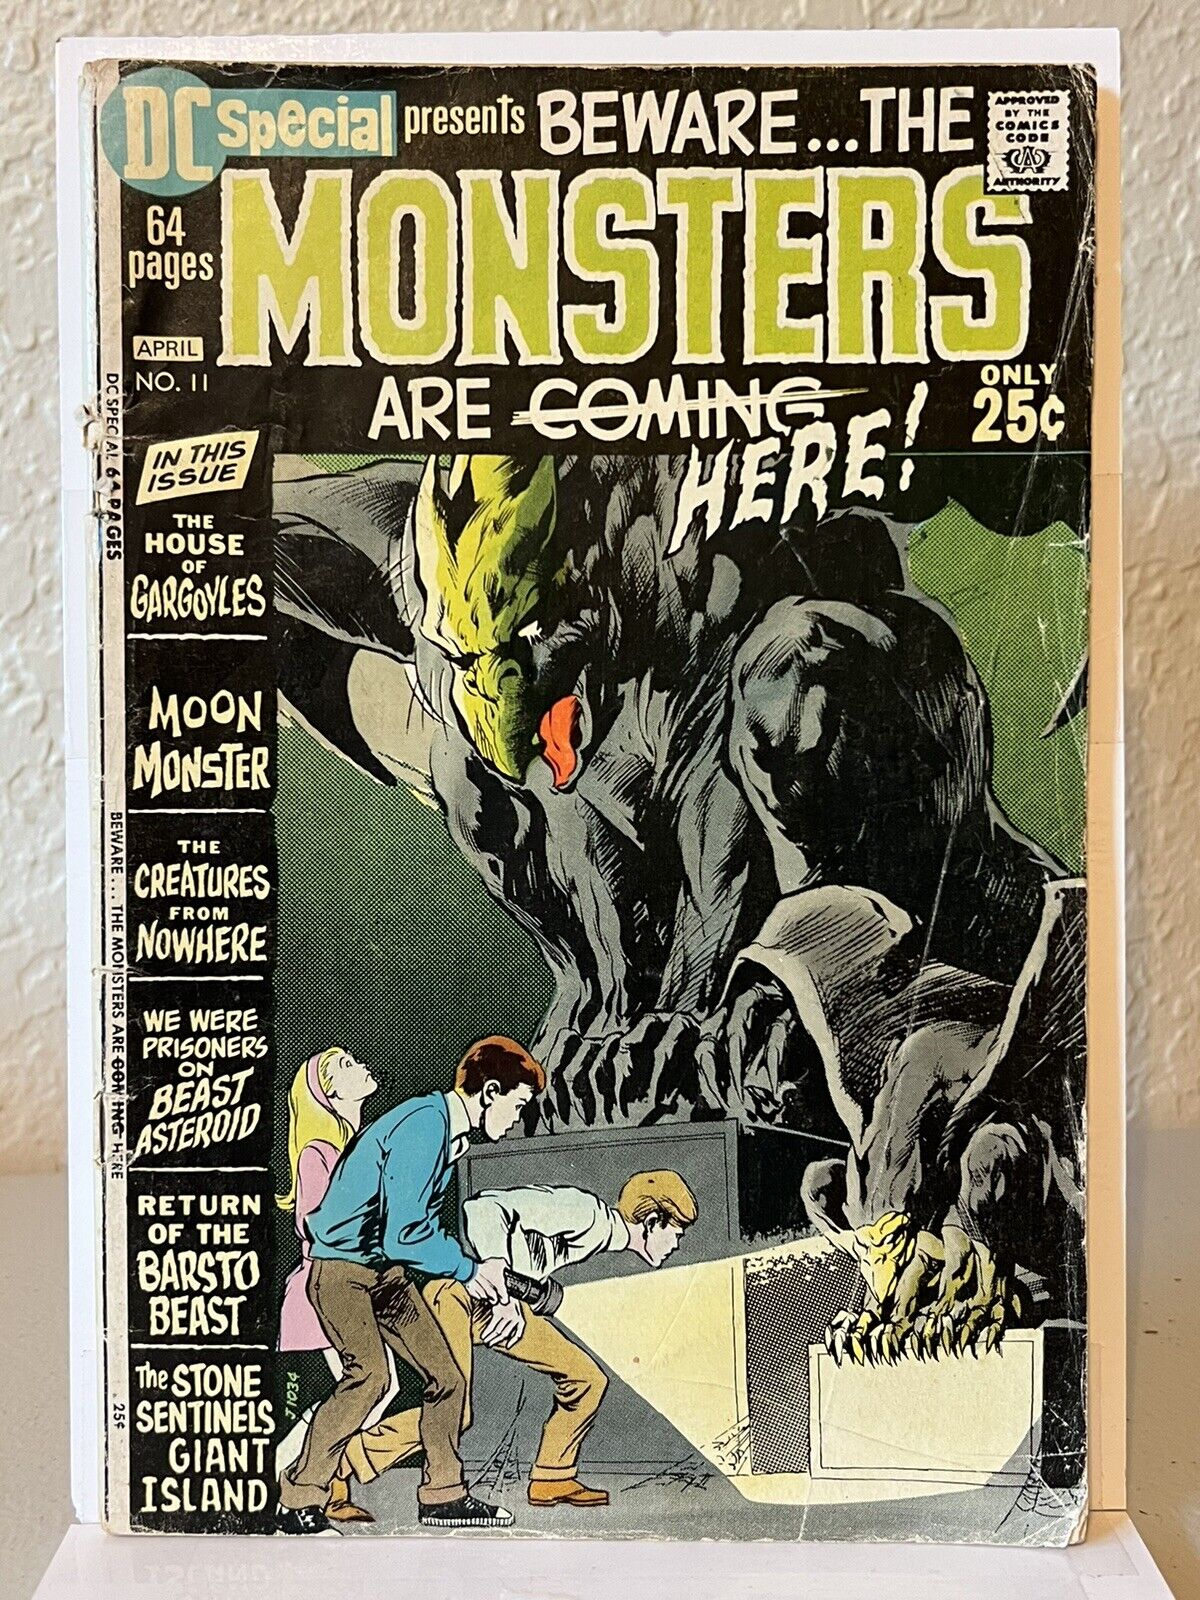 DC Special #11 * Beware The Monsters * 1971 DC Comics * Bronze Age Horror